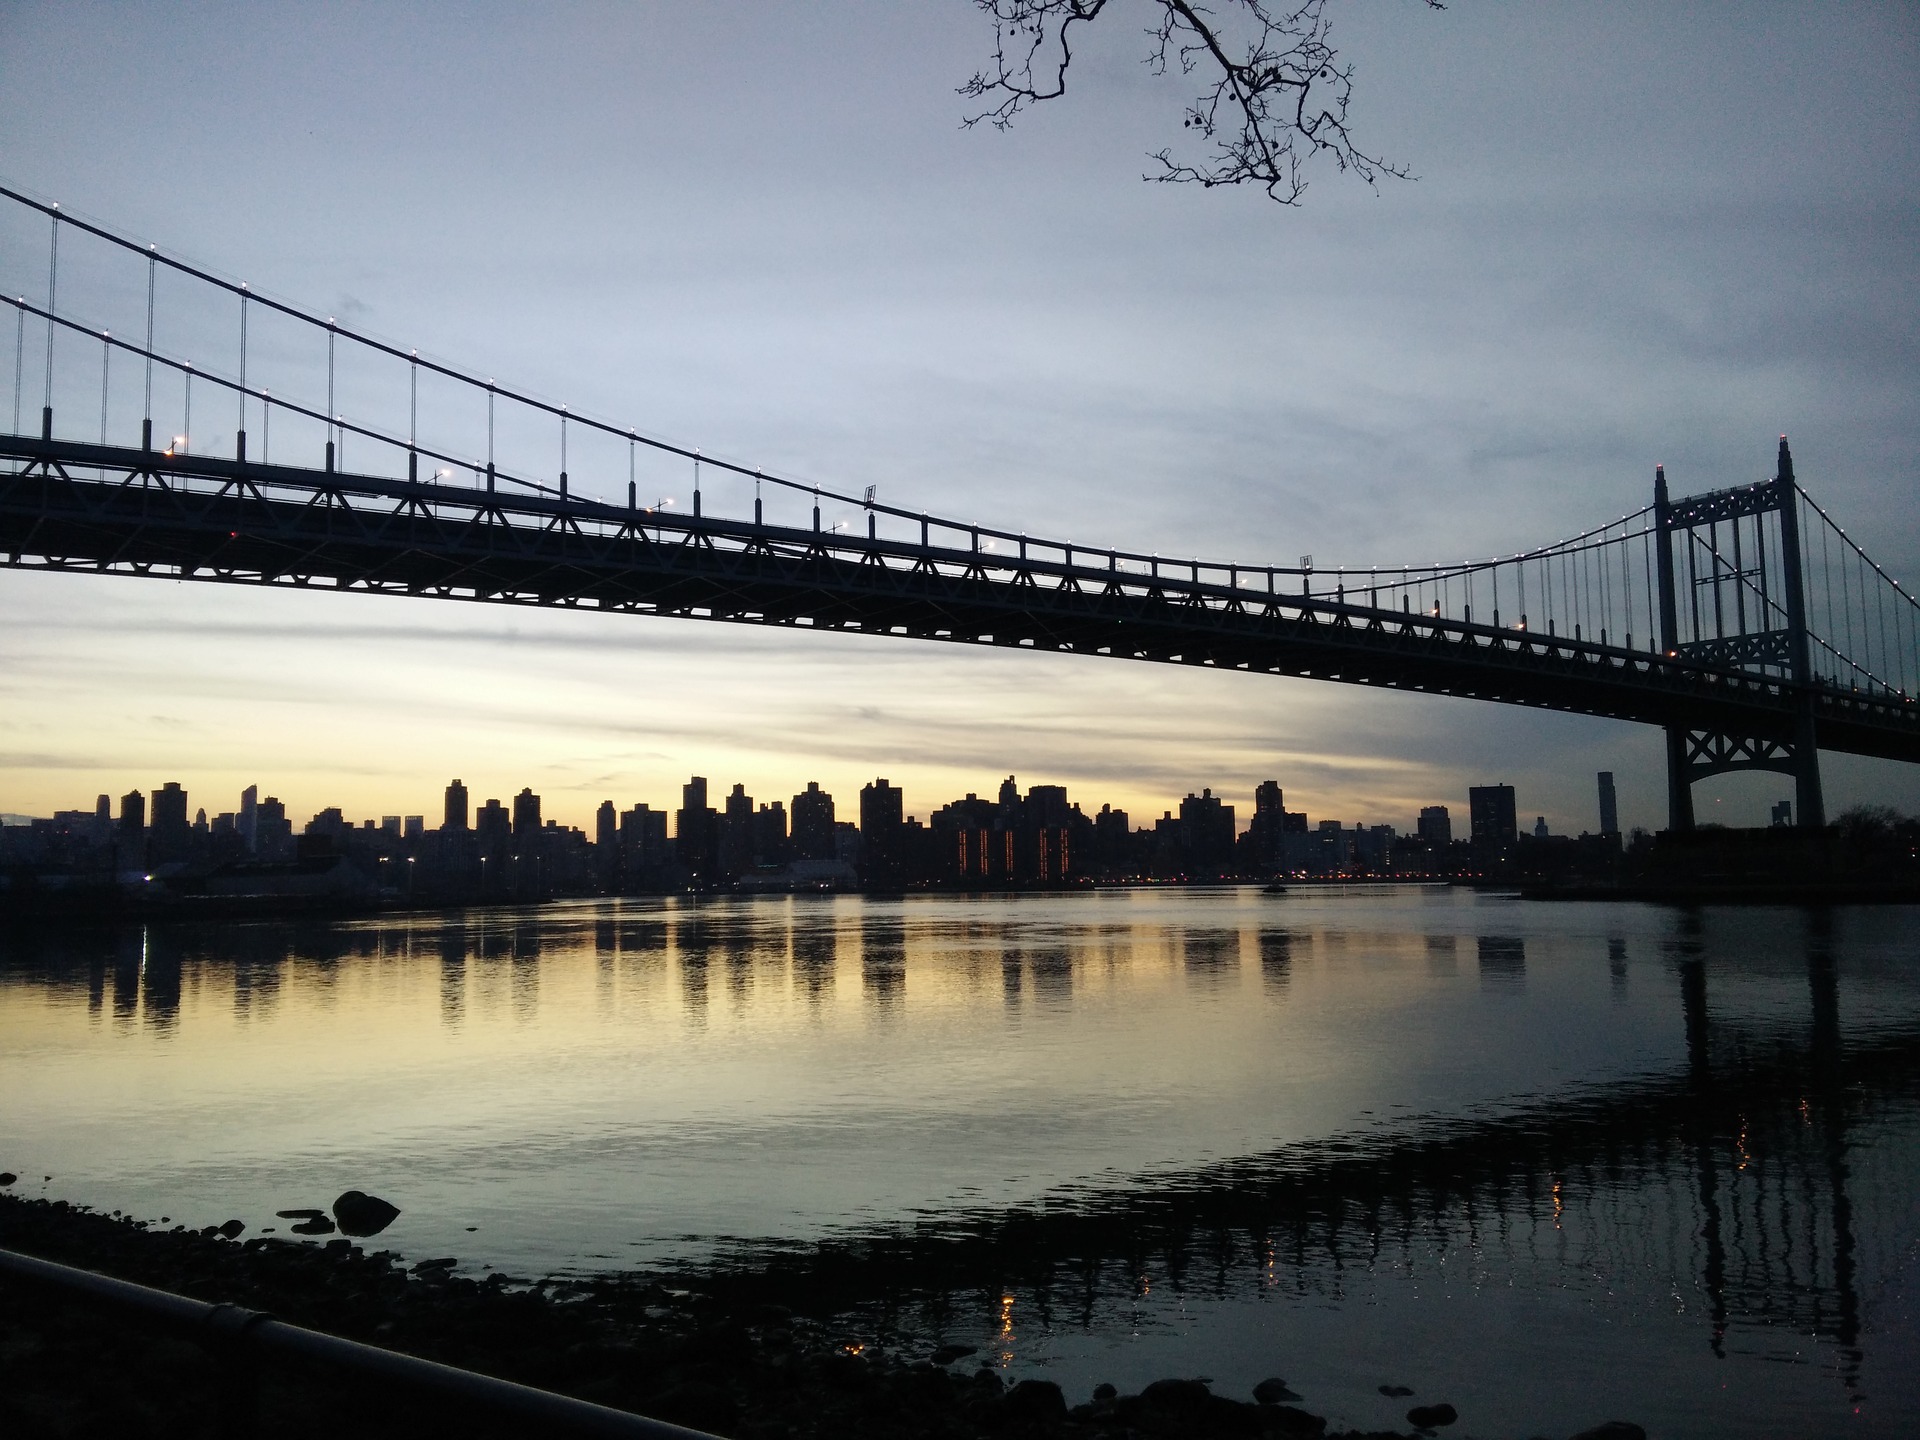 From a bench in Astoria Park, one can look past the Kennedy Bridge and see the Manhattan skyline.